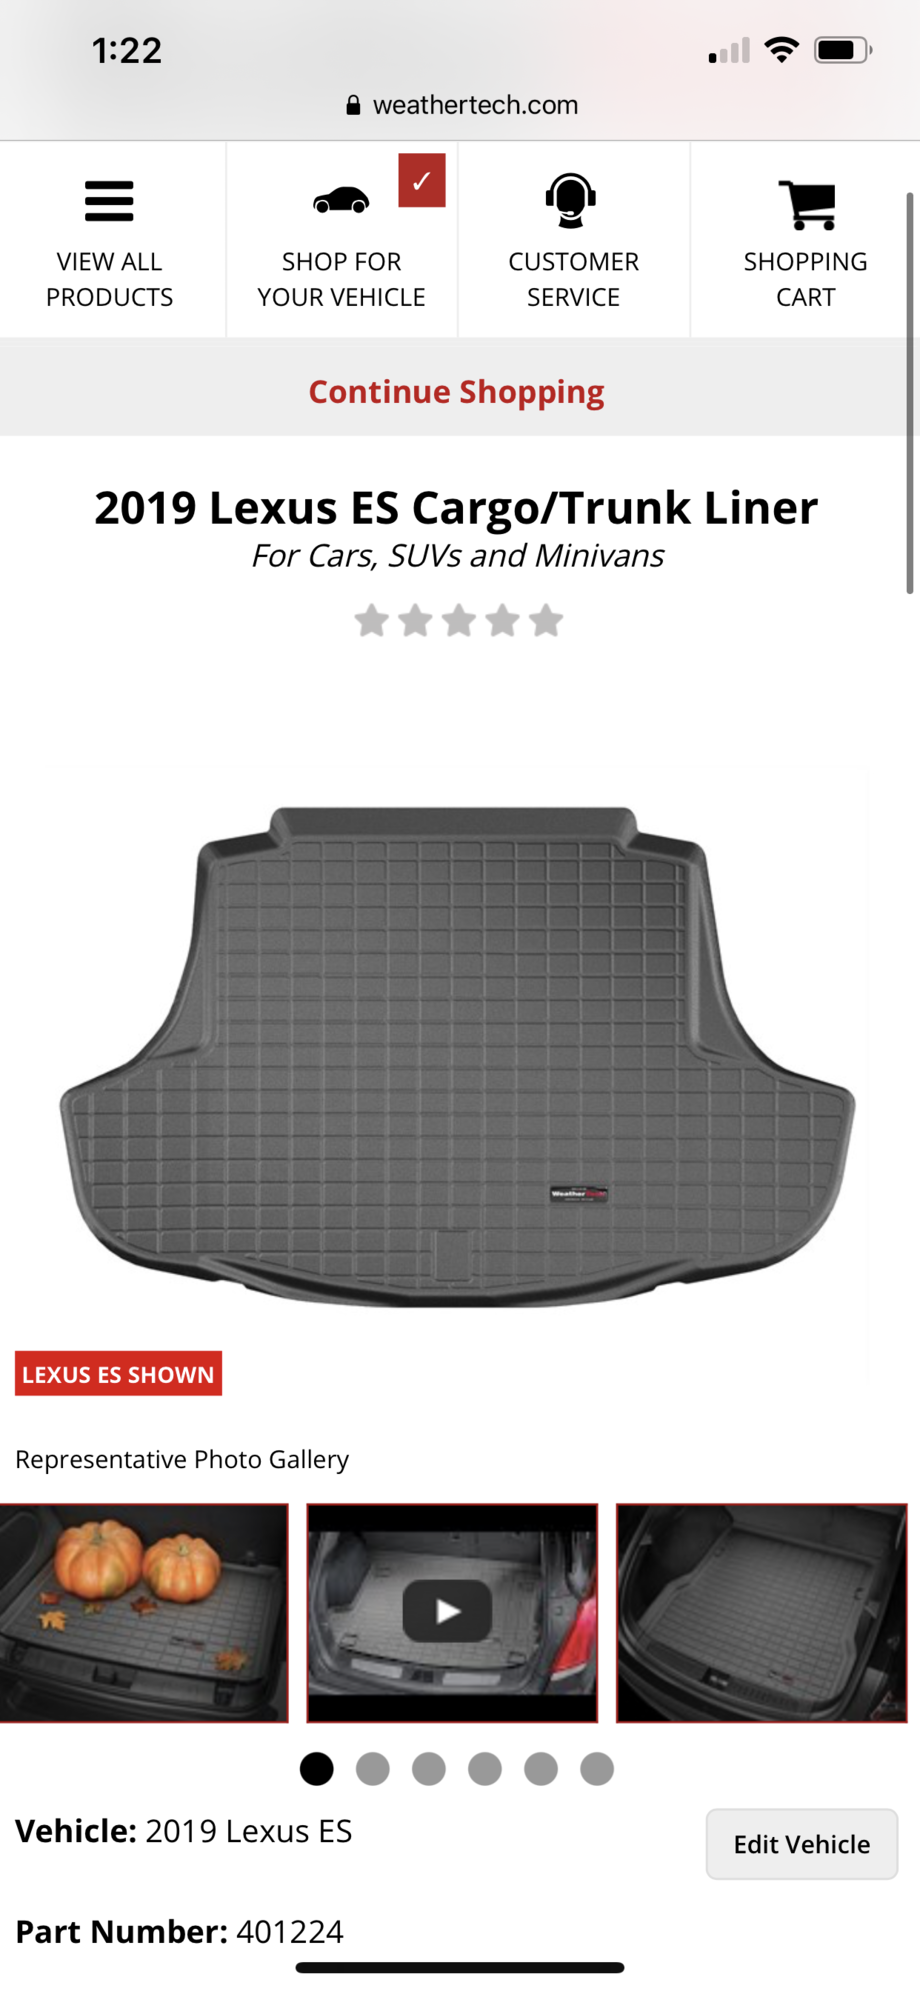 Interior/Upholstery - TX-Weathertech Trunk Liner 2019 ES350 - Used - 2019 to 2020 Lexus ES350 - Cibolo, TX 78108, United States